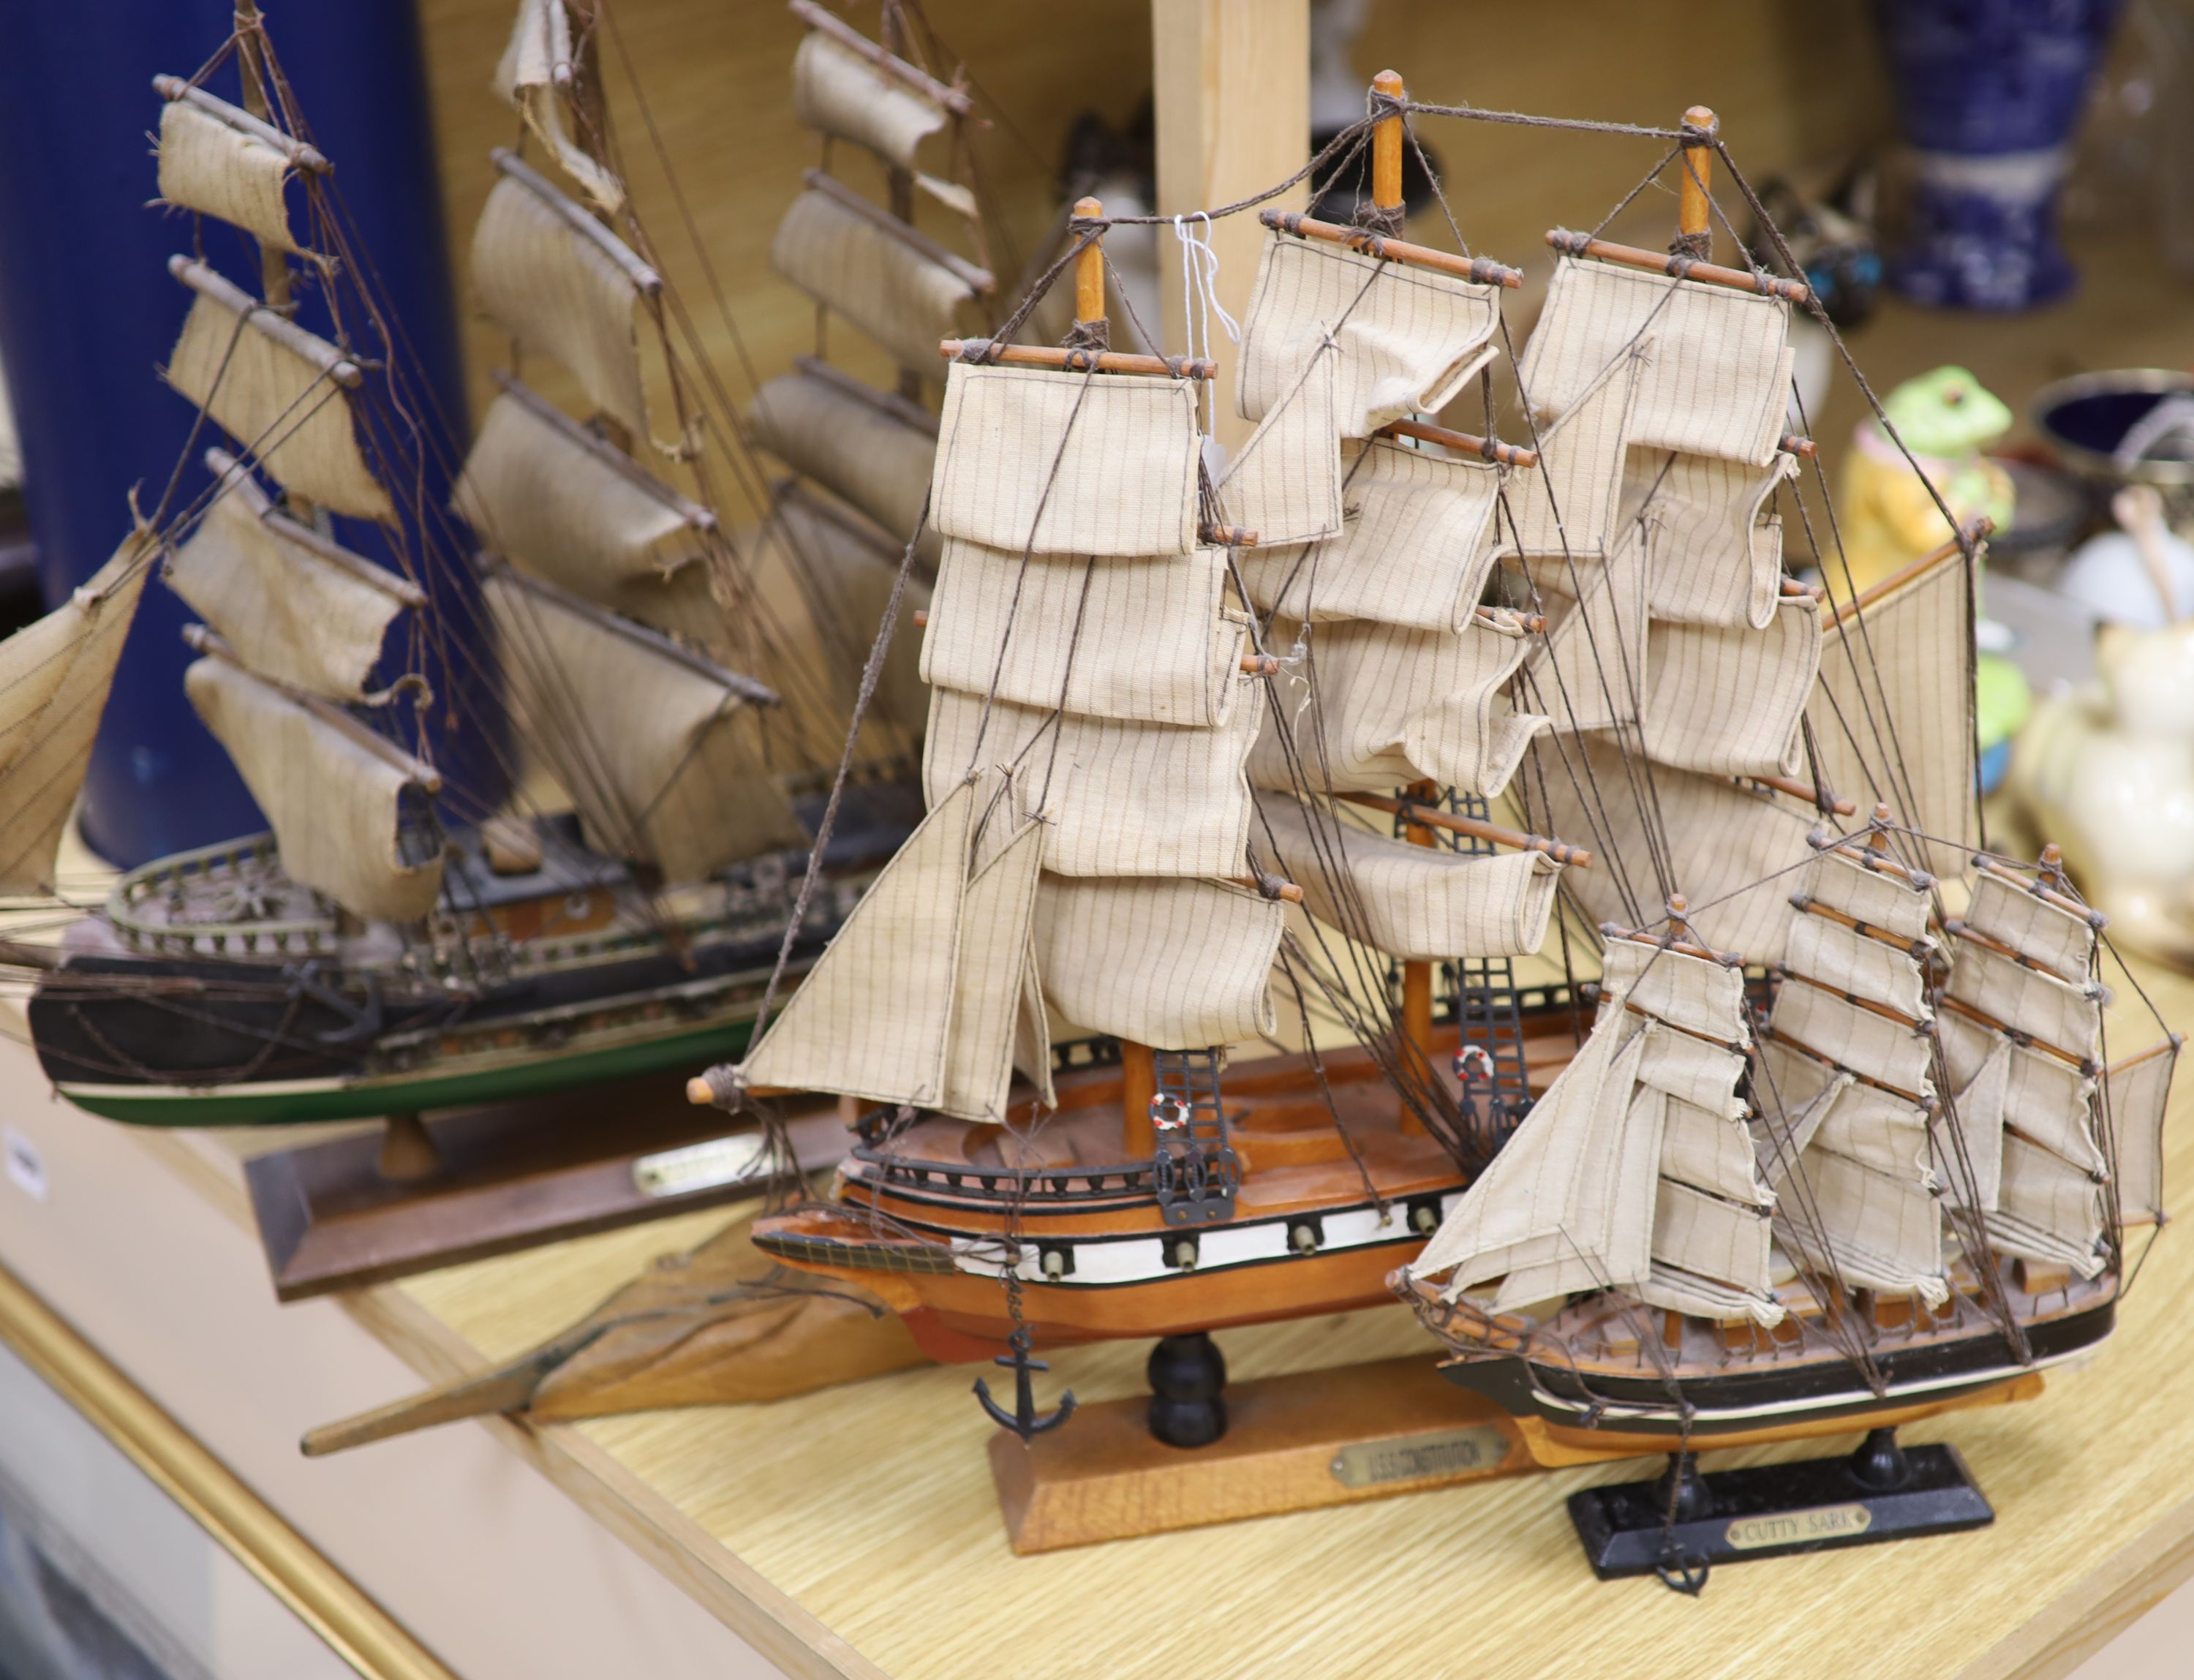 Three model ships: The Cutty Sark, The USS Constitution and Fragata, together with a carved wood Marlin